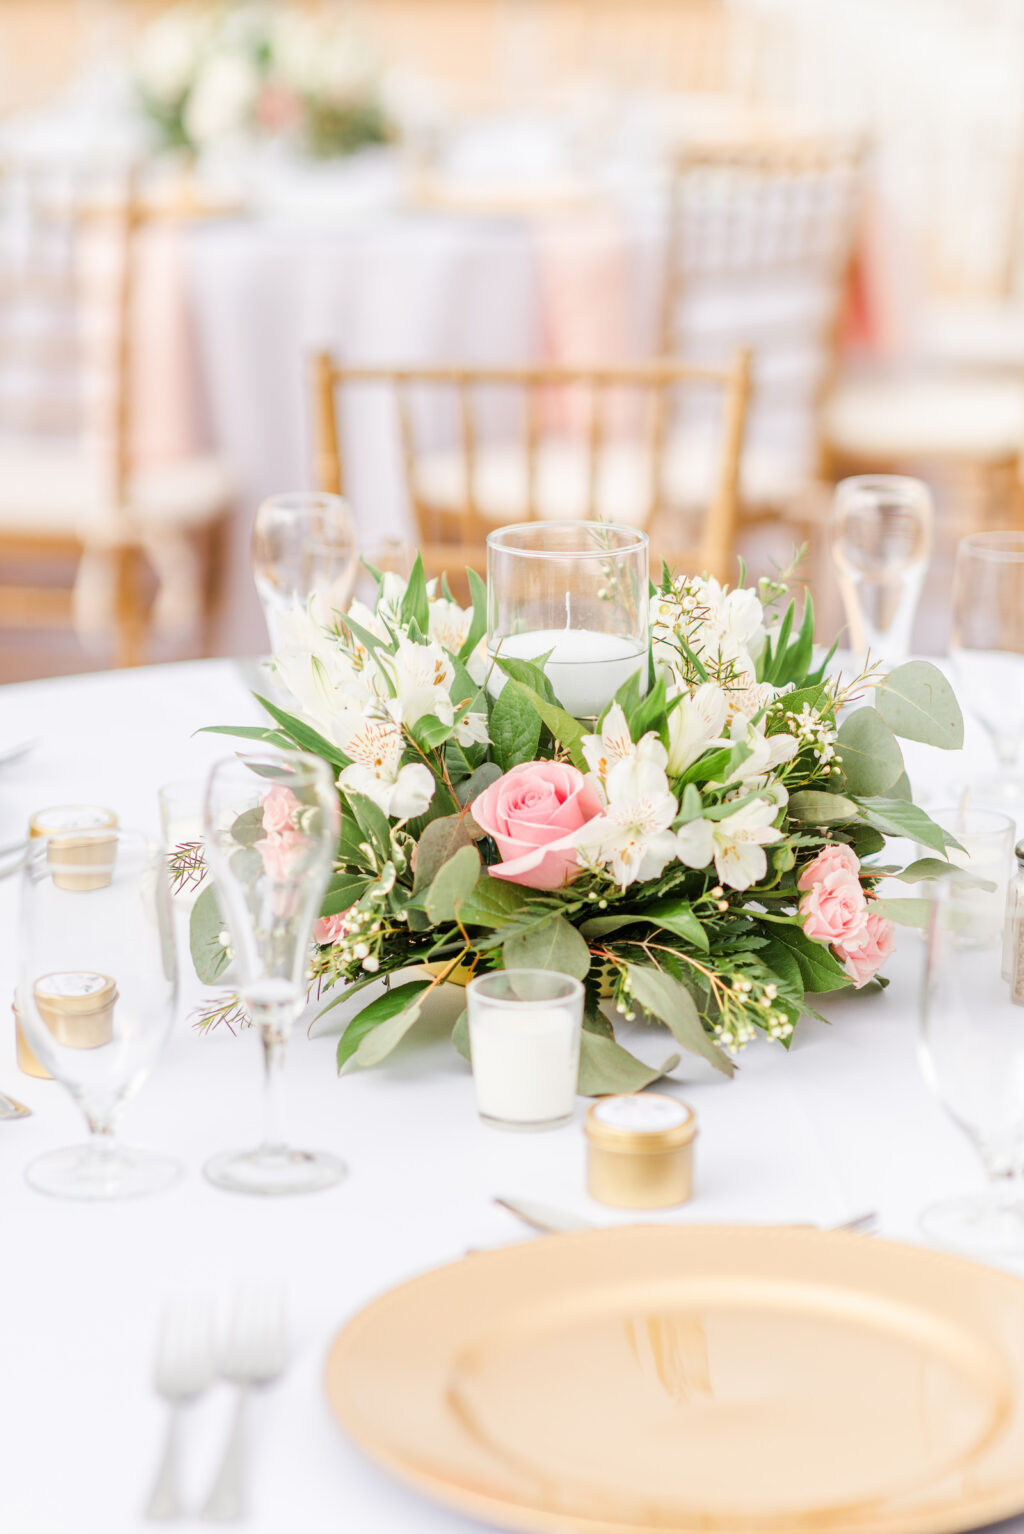 Romantic Pink Garden St. Pete Wedding Reception Decor | Low Greenery, White and Pink Floral Centerpiece and Candle | Tampa Bay Wedding Florist Brides N Blooms Designs